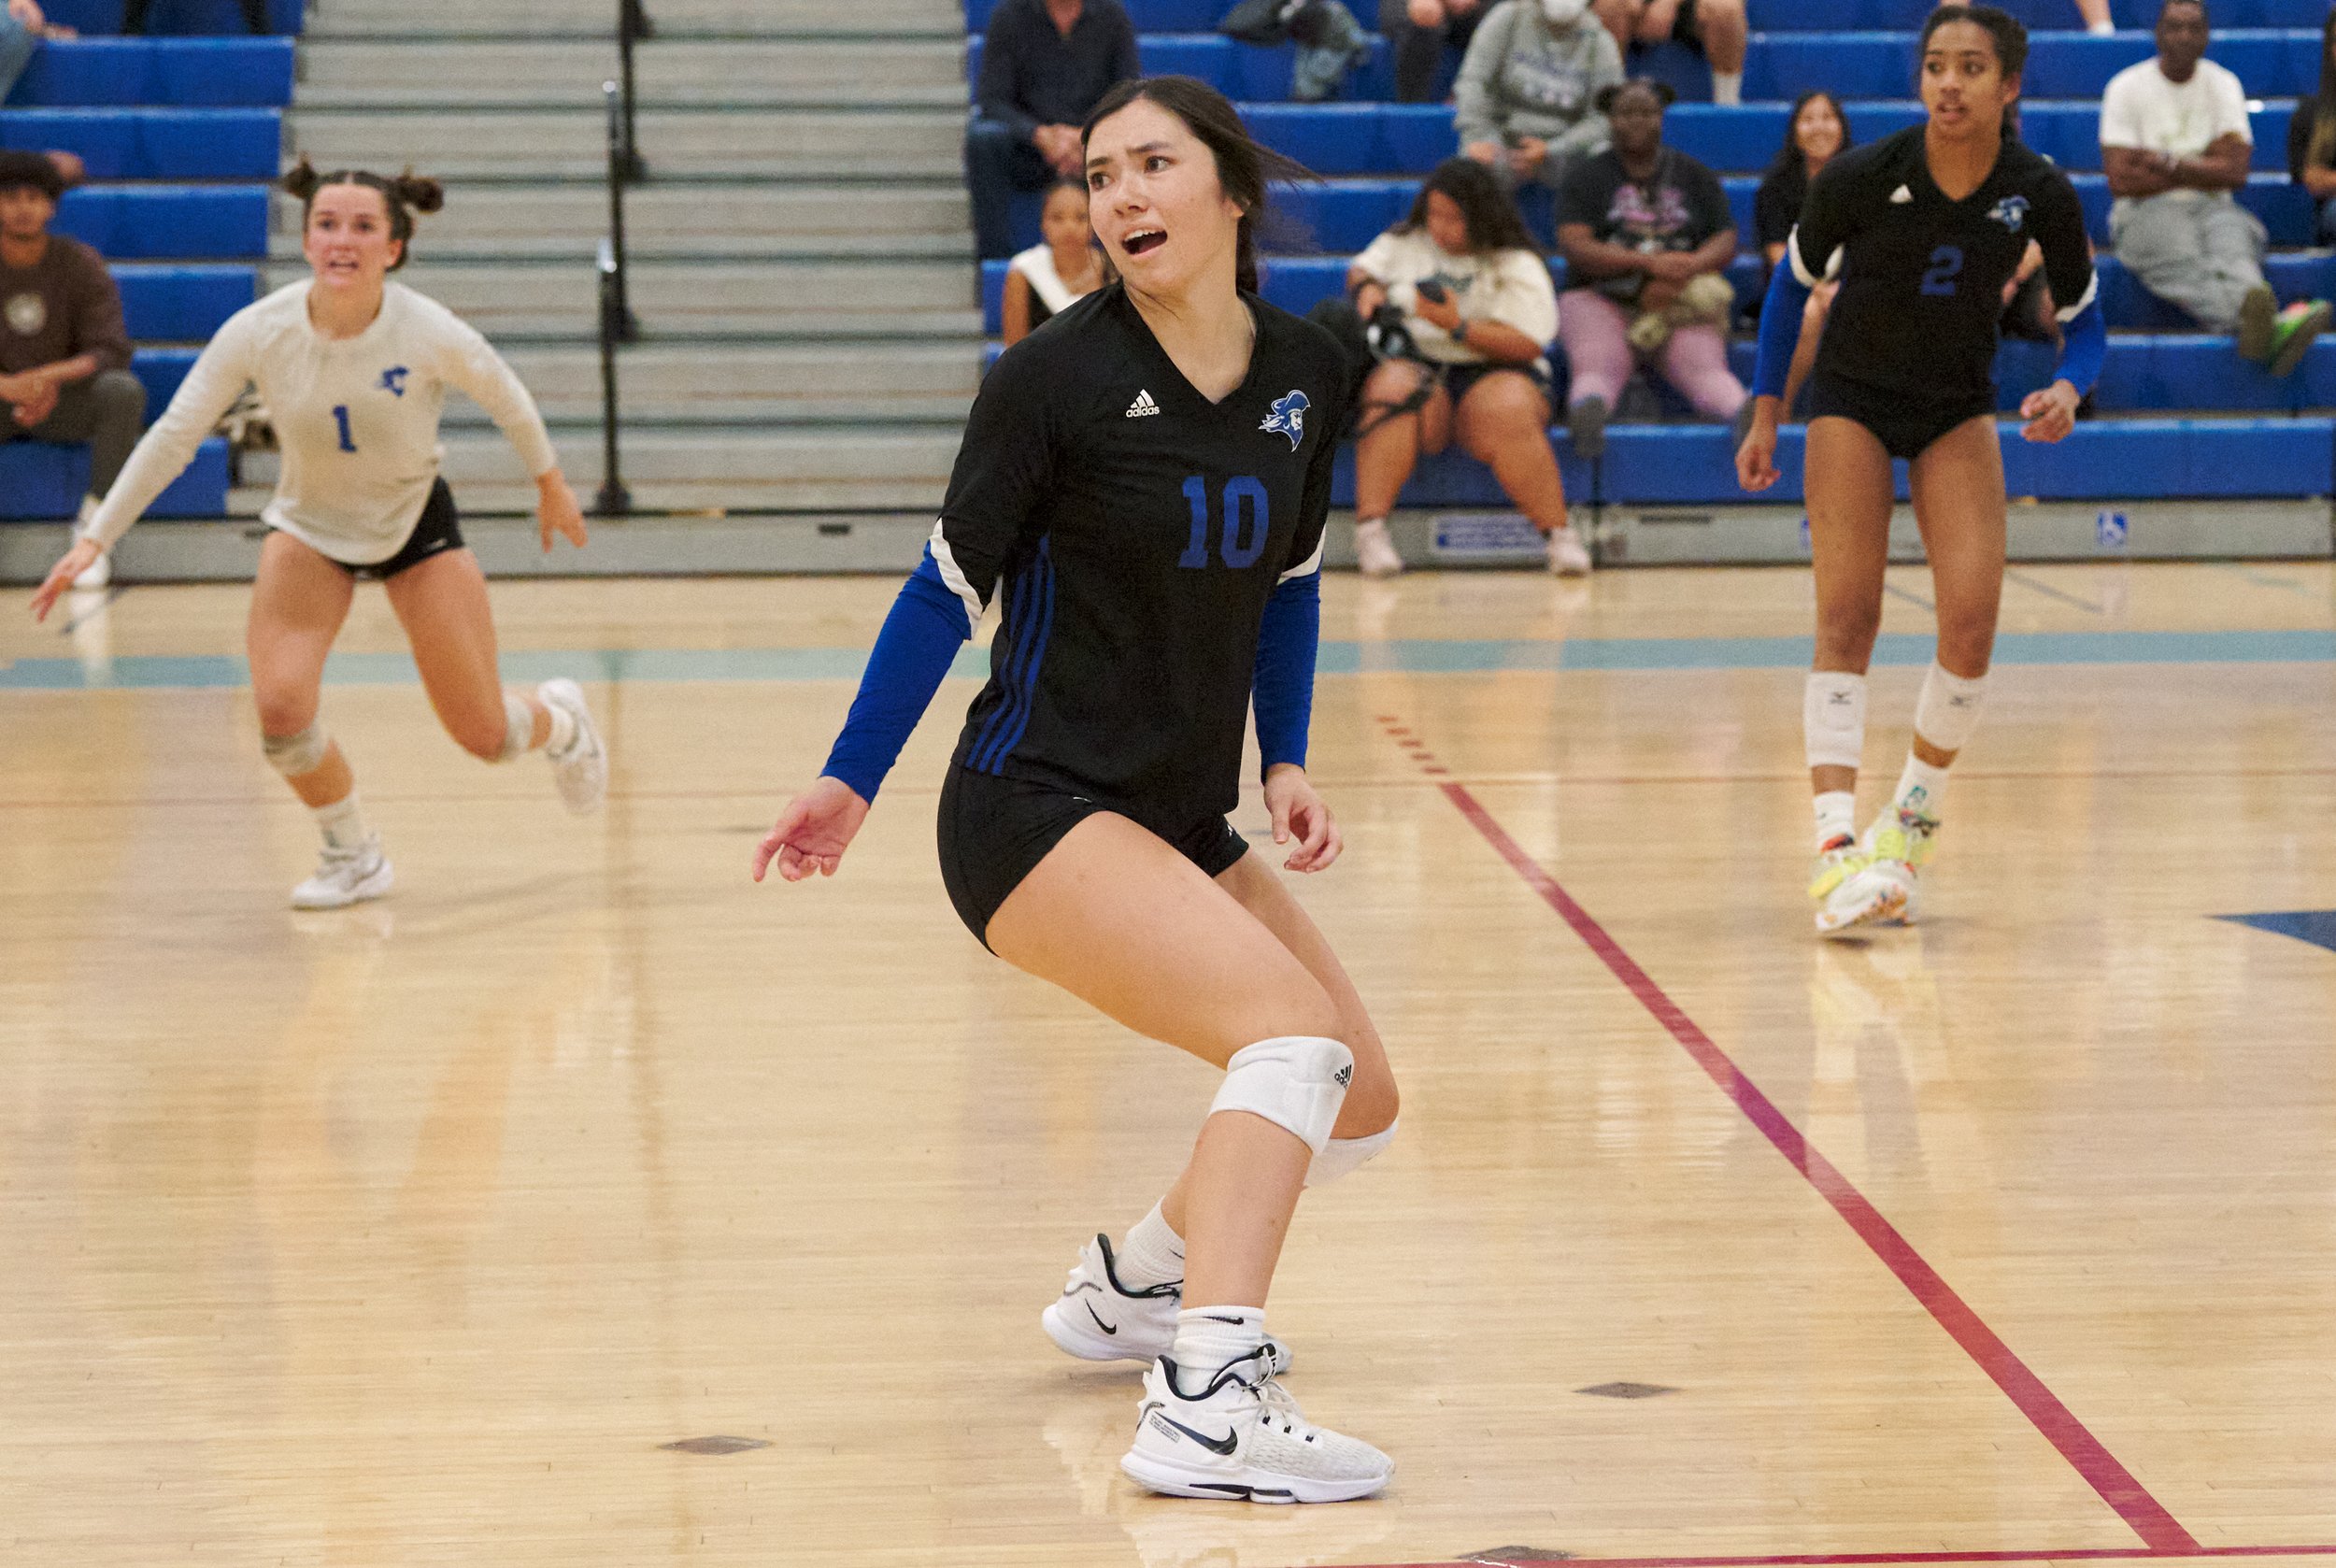  Santa Monica College Corsairs' Sophia Odle (center), Halle Anderson (left), and Amaya Bernardo (right) react to a missed ball during fifth set of the women's volleyball match against the Moorpark College Raiders on Friday, Sept. 23, 2022, at the Cor